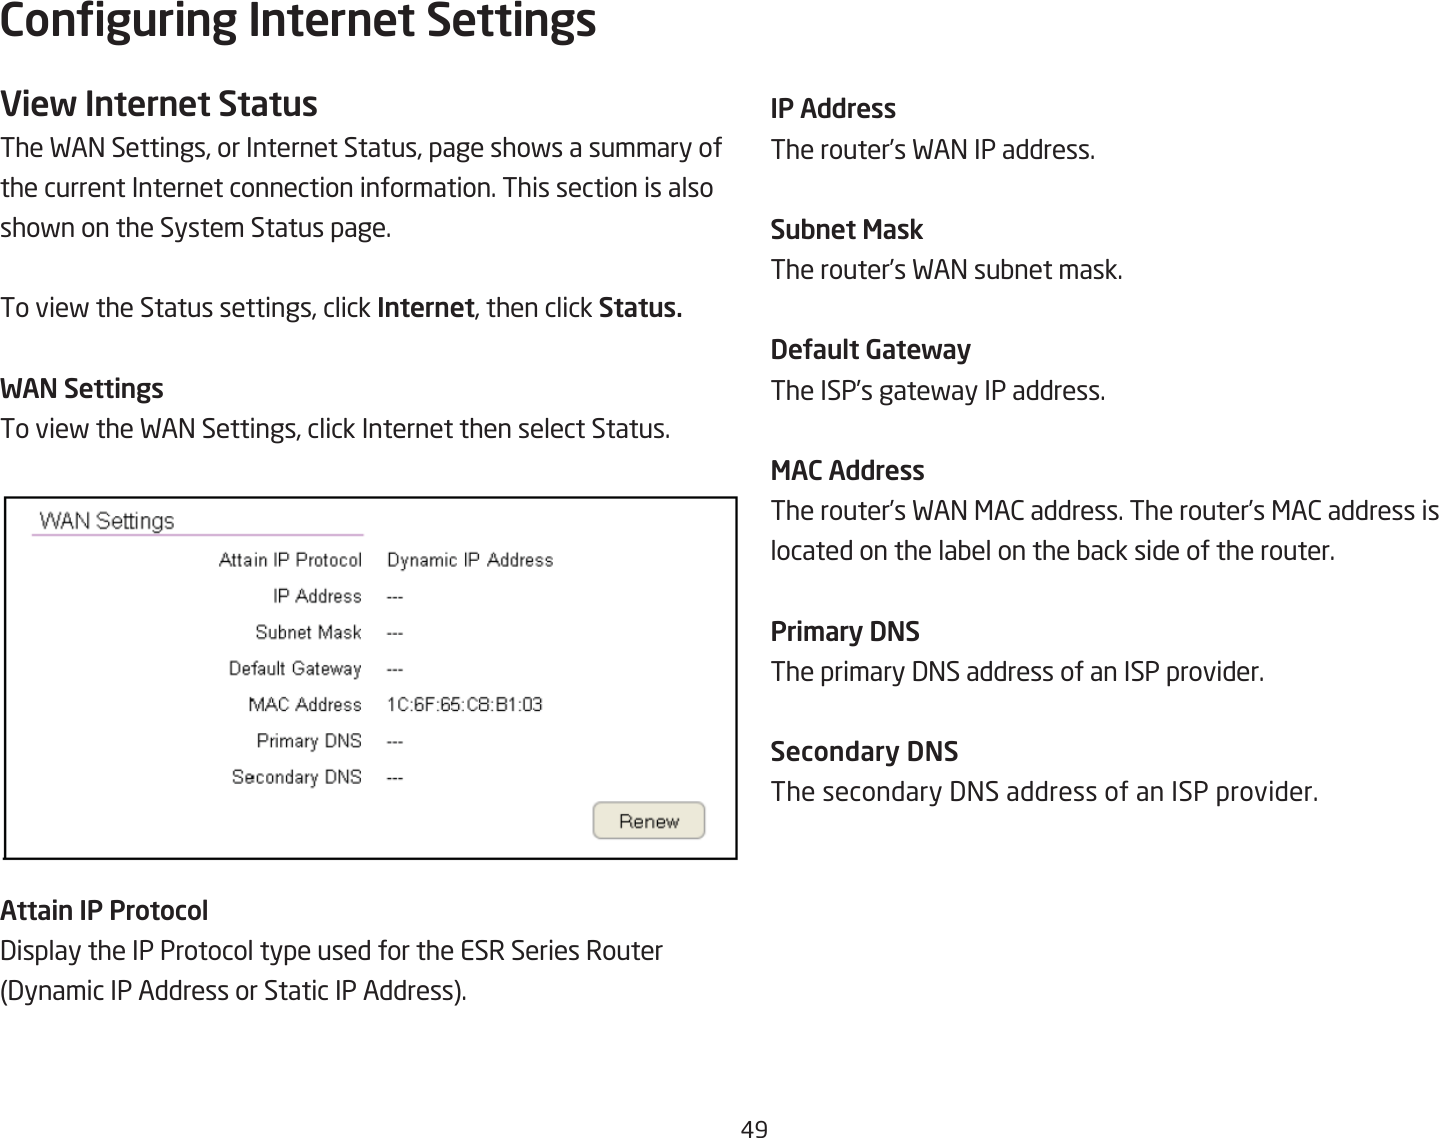 #9Conguring Internet SettingsView Internet StatusThe FA= Settings, or Internet Status, page shofs a summary of the current Internet connection information. This section is alsoshofn on the System Status page.To vief the Status settings, click Internet, then click Status.WAN SettingsTo vief the FA= Settings, click Internet then select Status.Attain IP Protocol3isplay the IP Protocol type used for the ESR Series Router 3ynamic IP Address or Static IP Address.IP AddressThe router’s FA= IP address.Subnet MaskThe router’s FA= suQnet mask.DeUault GatewayThe ISP’s gatefay IP address.MAC AddressThe router’s FA= &lt;A2 address. The router’s &lt;A2 address is located on the laQel on the Qack side of the router.Pri\ary DNSThe primary 3=S address of an ISP provider.Secondary DNSThe secondary 3=S address of an ISP provider.